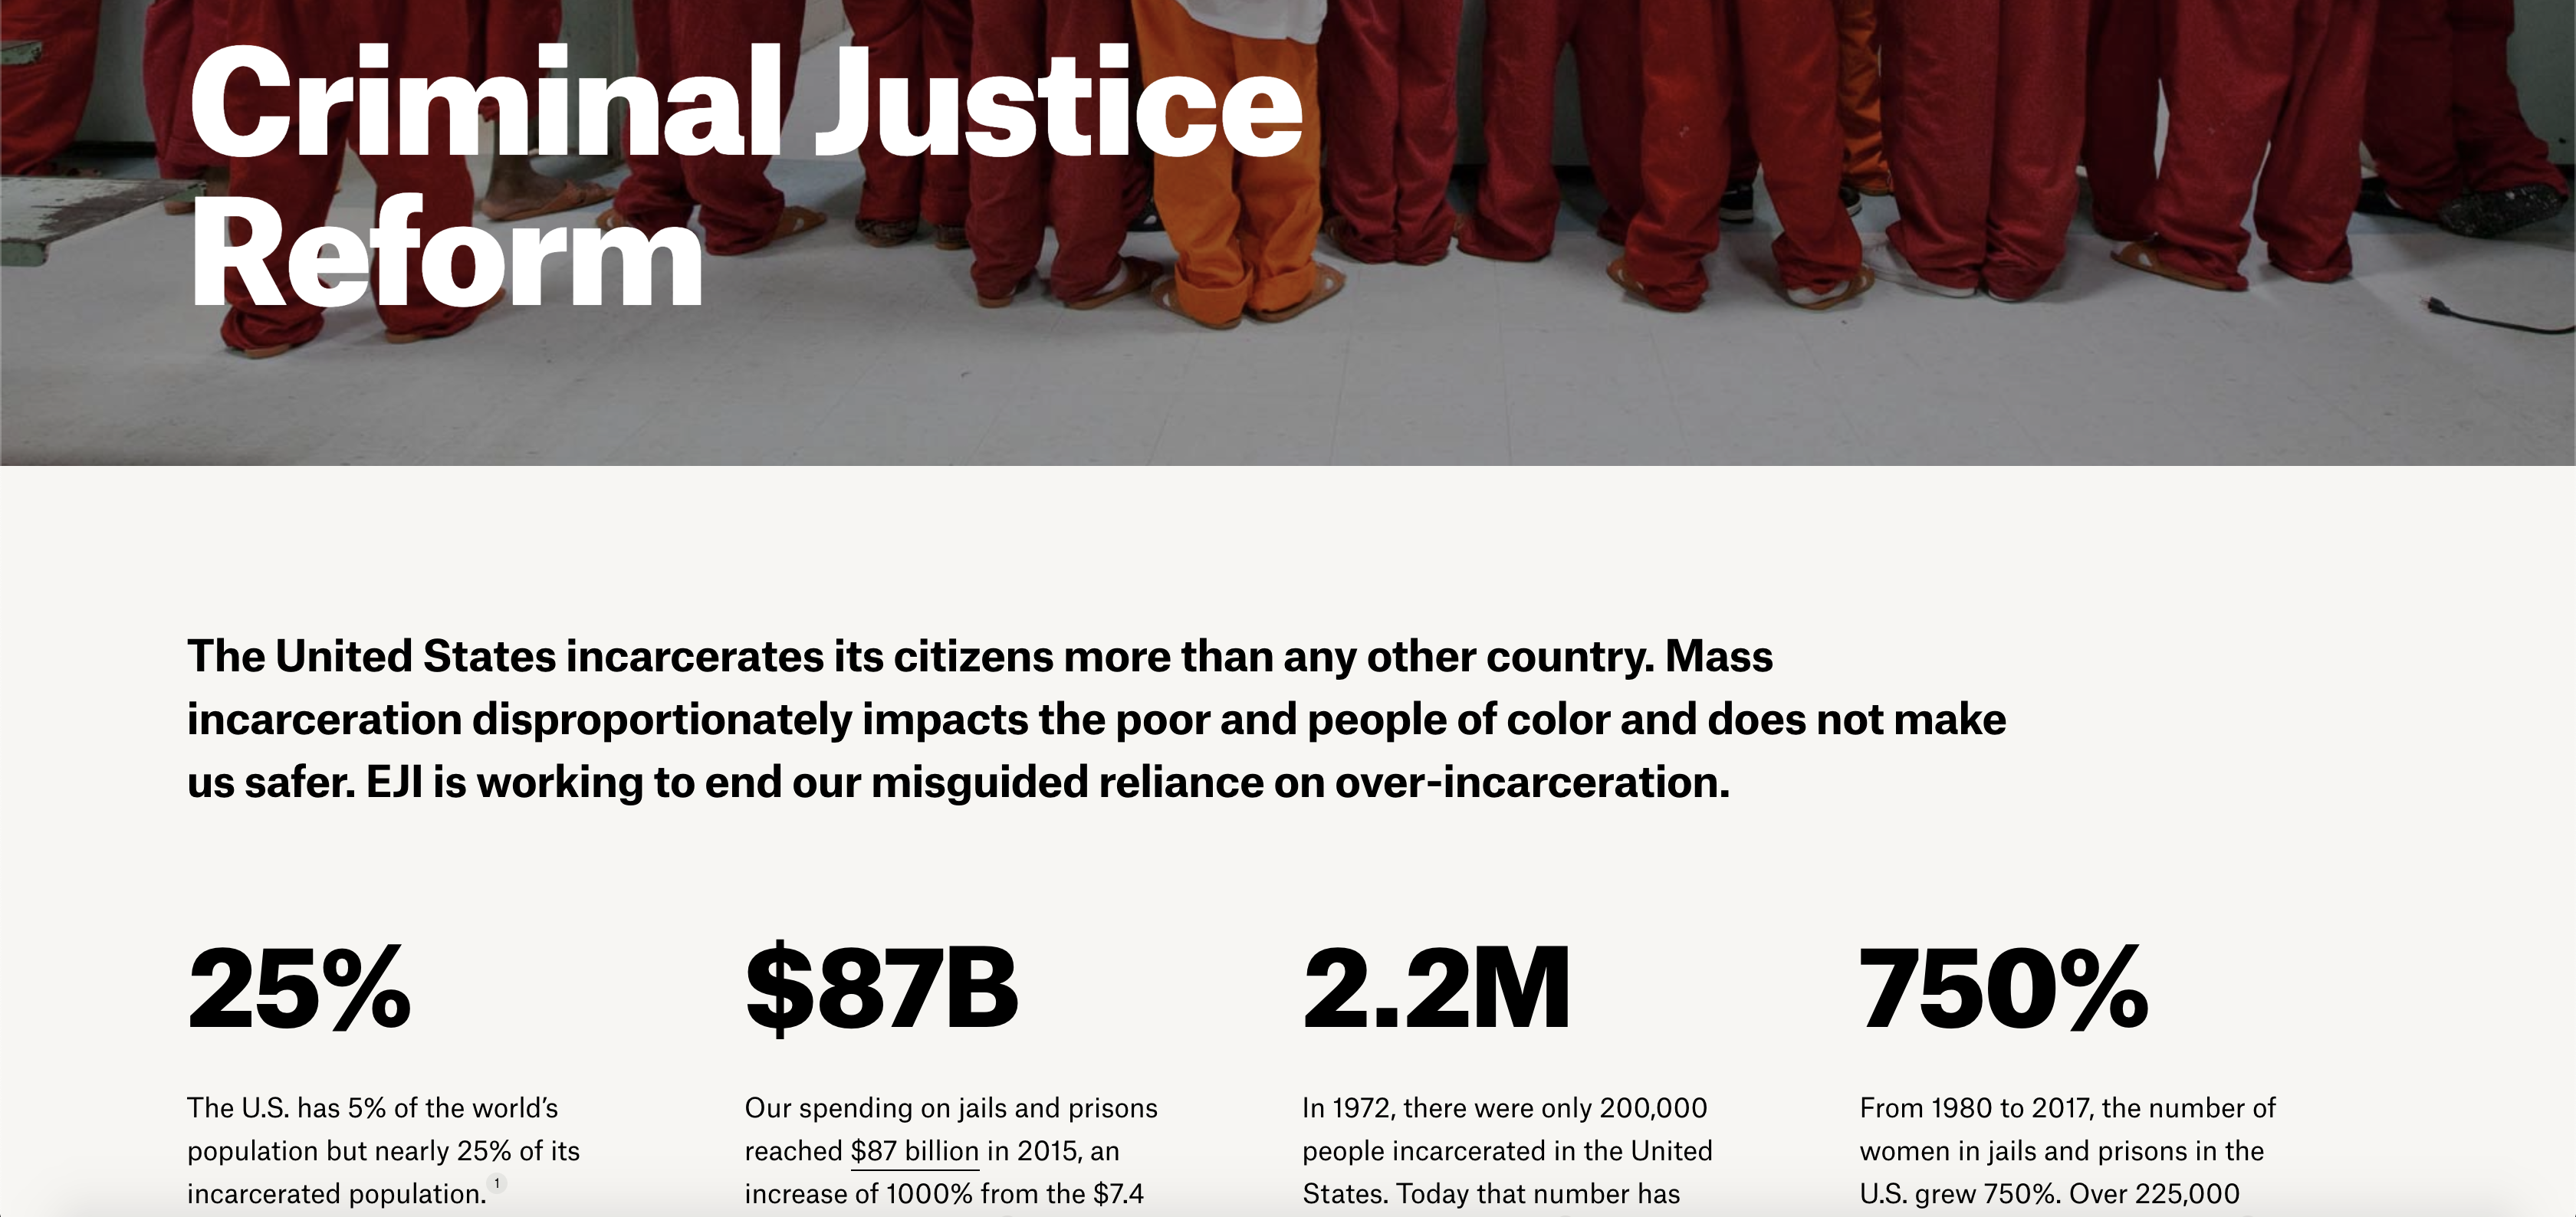 The opening paragraph on the Criminal Justice Reform page on the EJI website